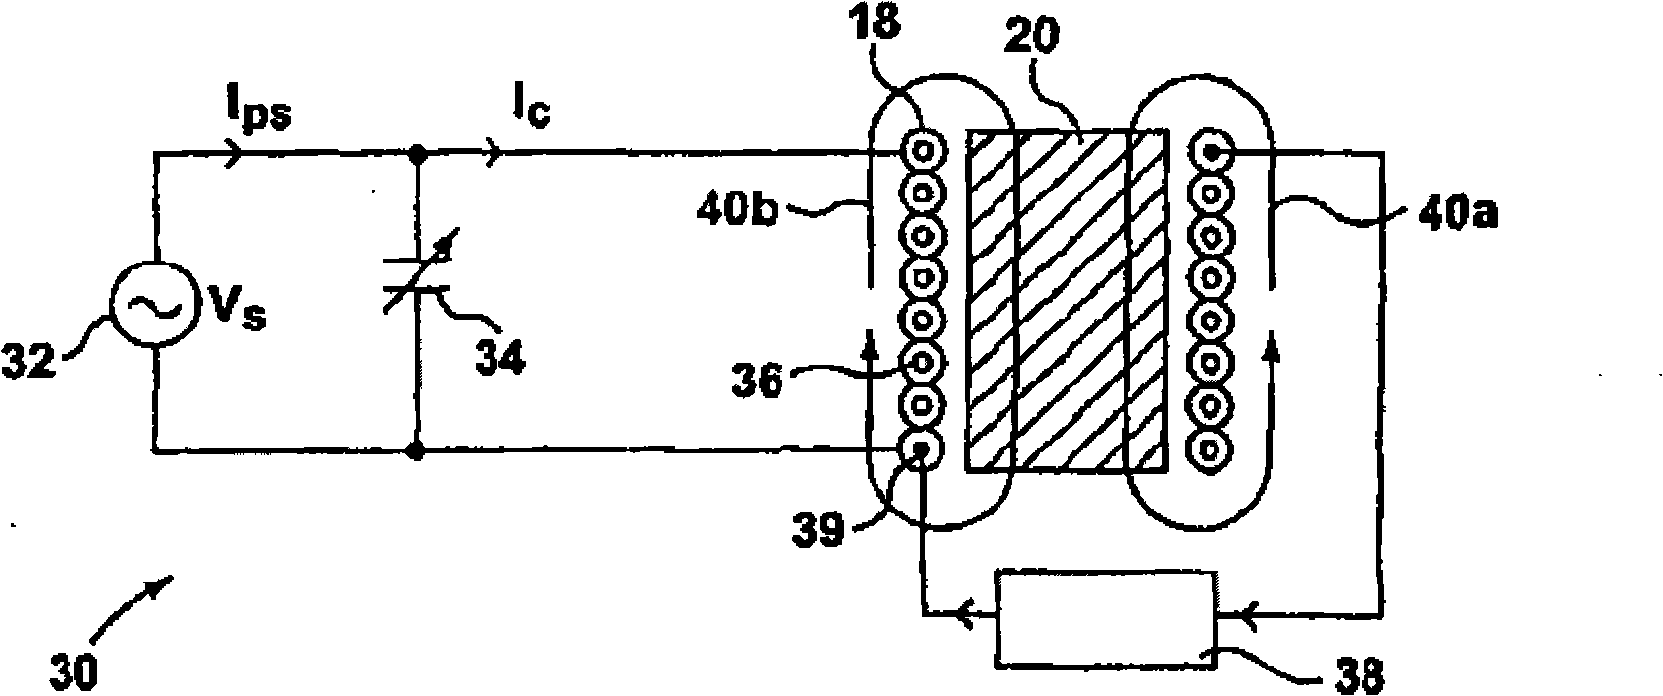 Method and apparatus for object temperature control